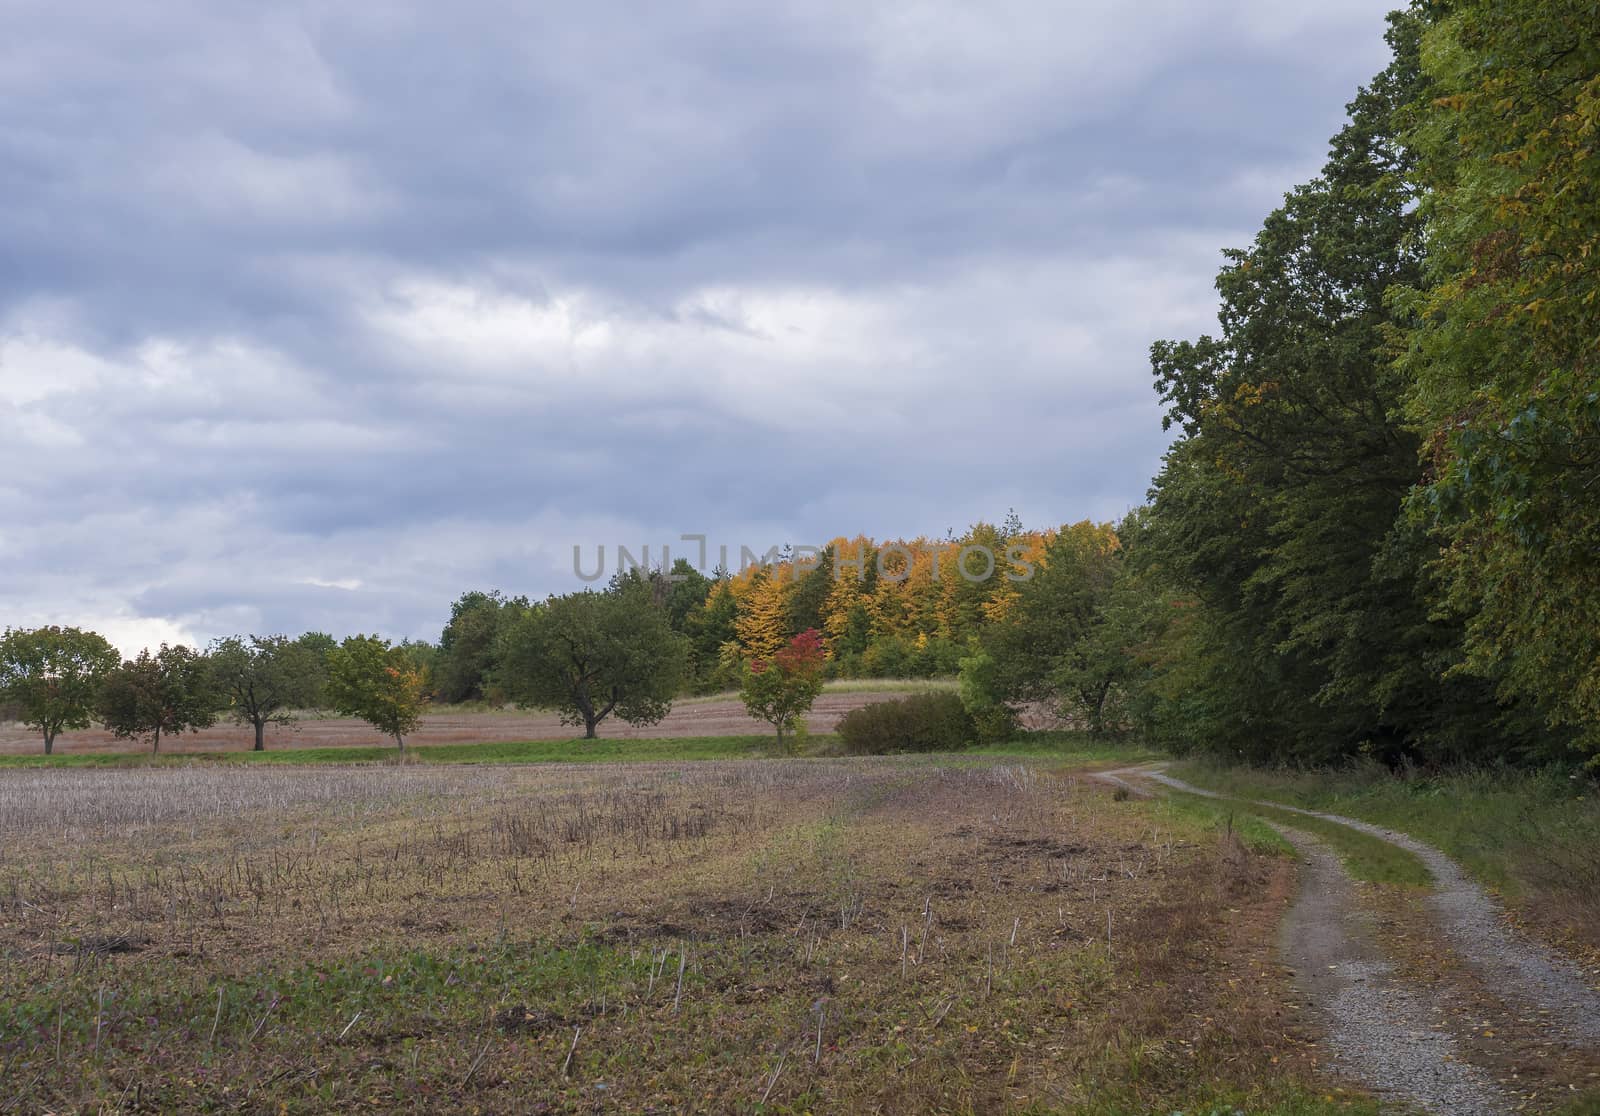 view of fields, row of colorful trees and dirt road running through rural landscape at countryside, Autumn cloudy sky